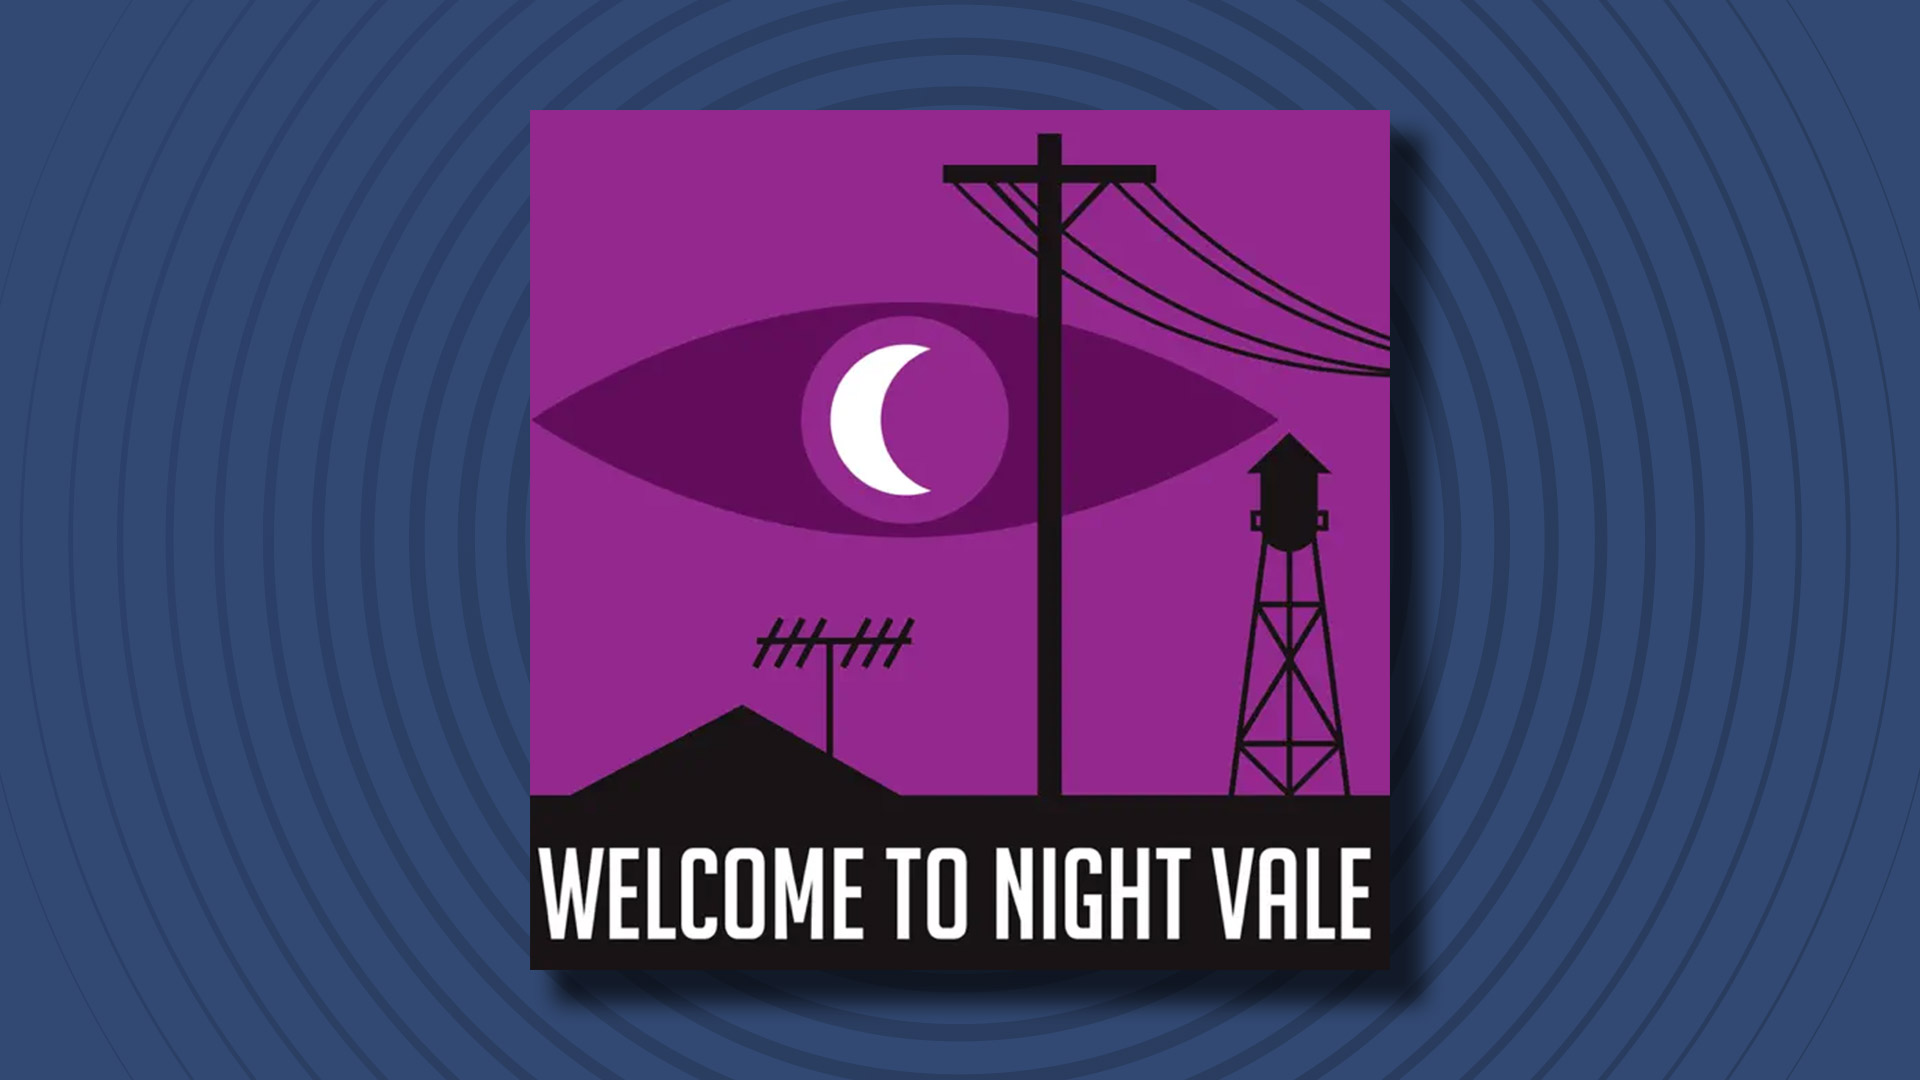 The logo of the Welcome To Night Vale podcast on a dark blue background